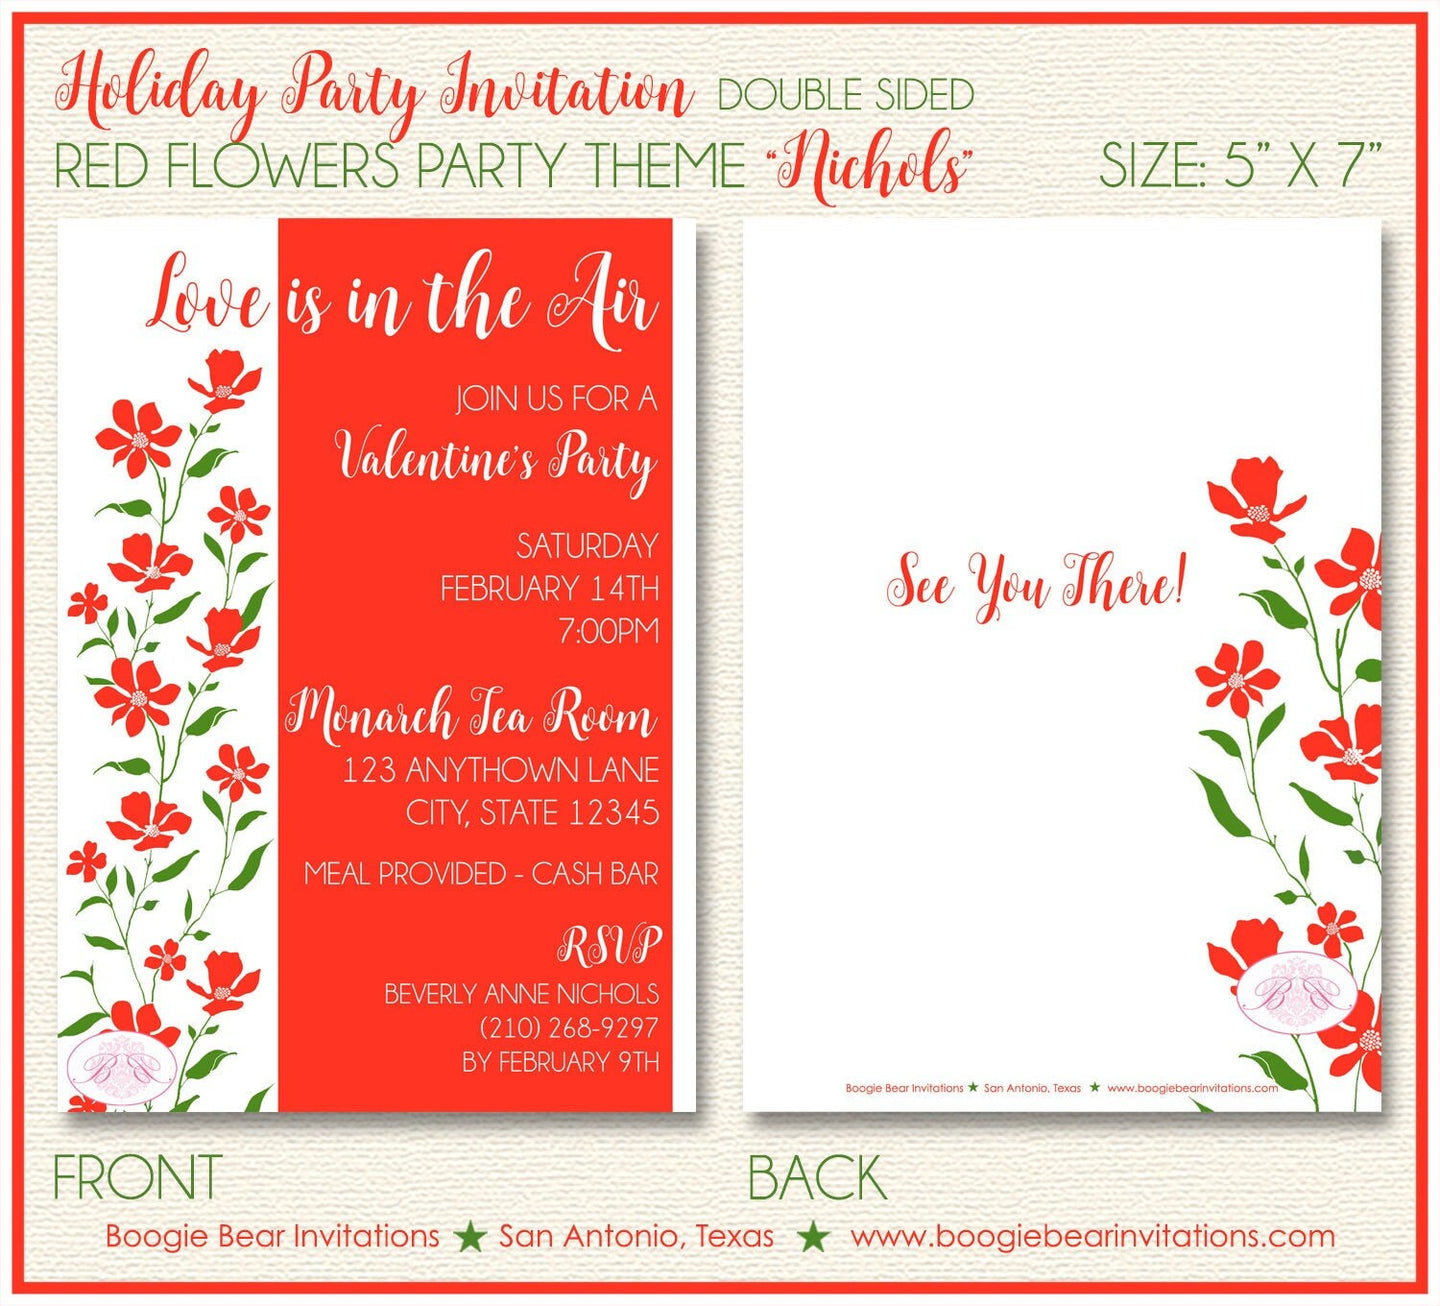 Red Flowers Valentines Party Invitation Day White Green Floral Love Garden Boogie Bear Invitations Nichols Theme Paperless Printable Printed